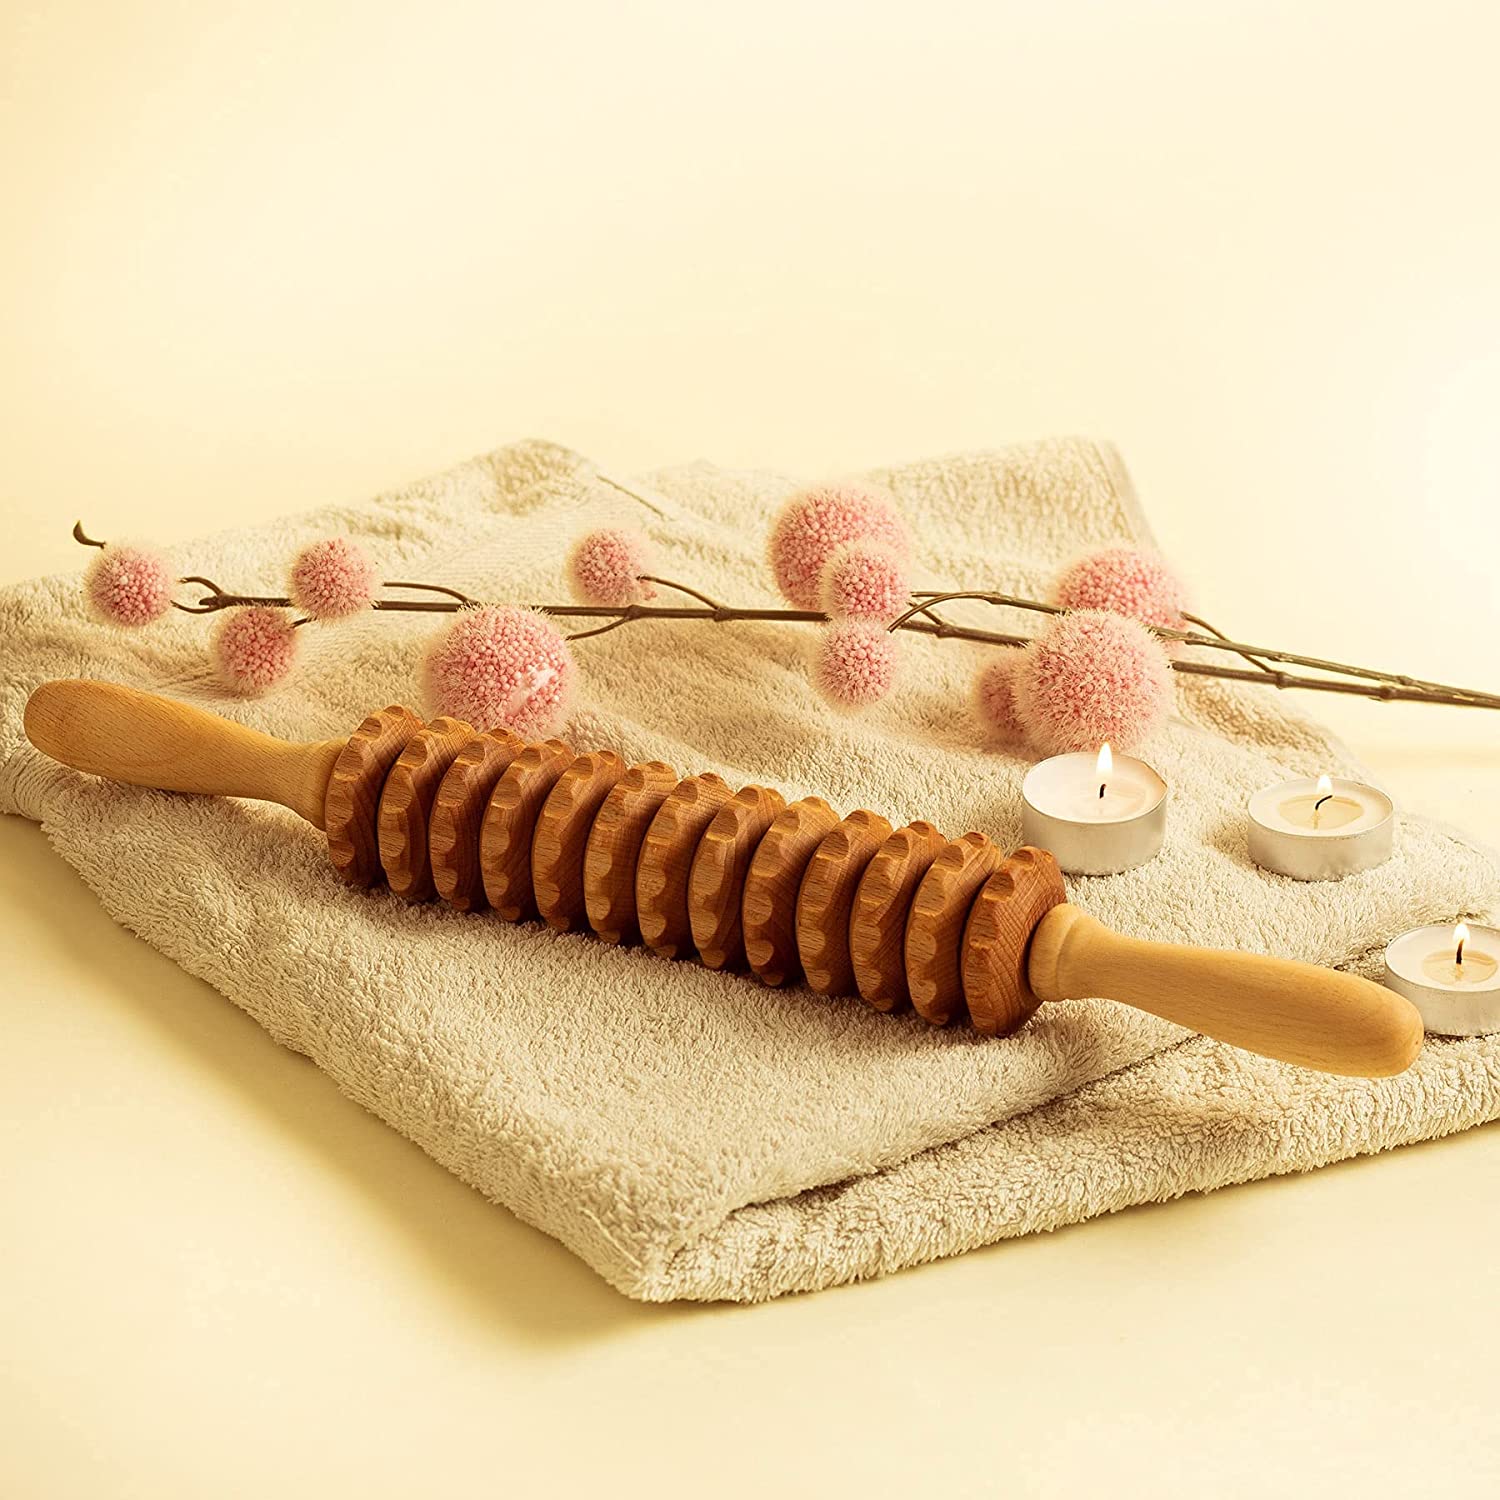 Lymphatic Drainage Body Massage Roller